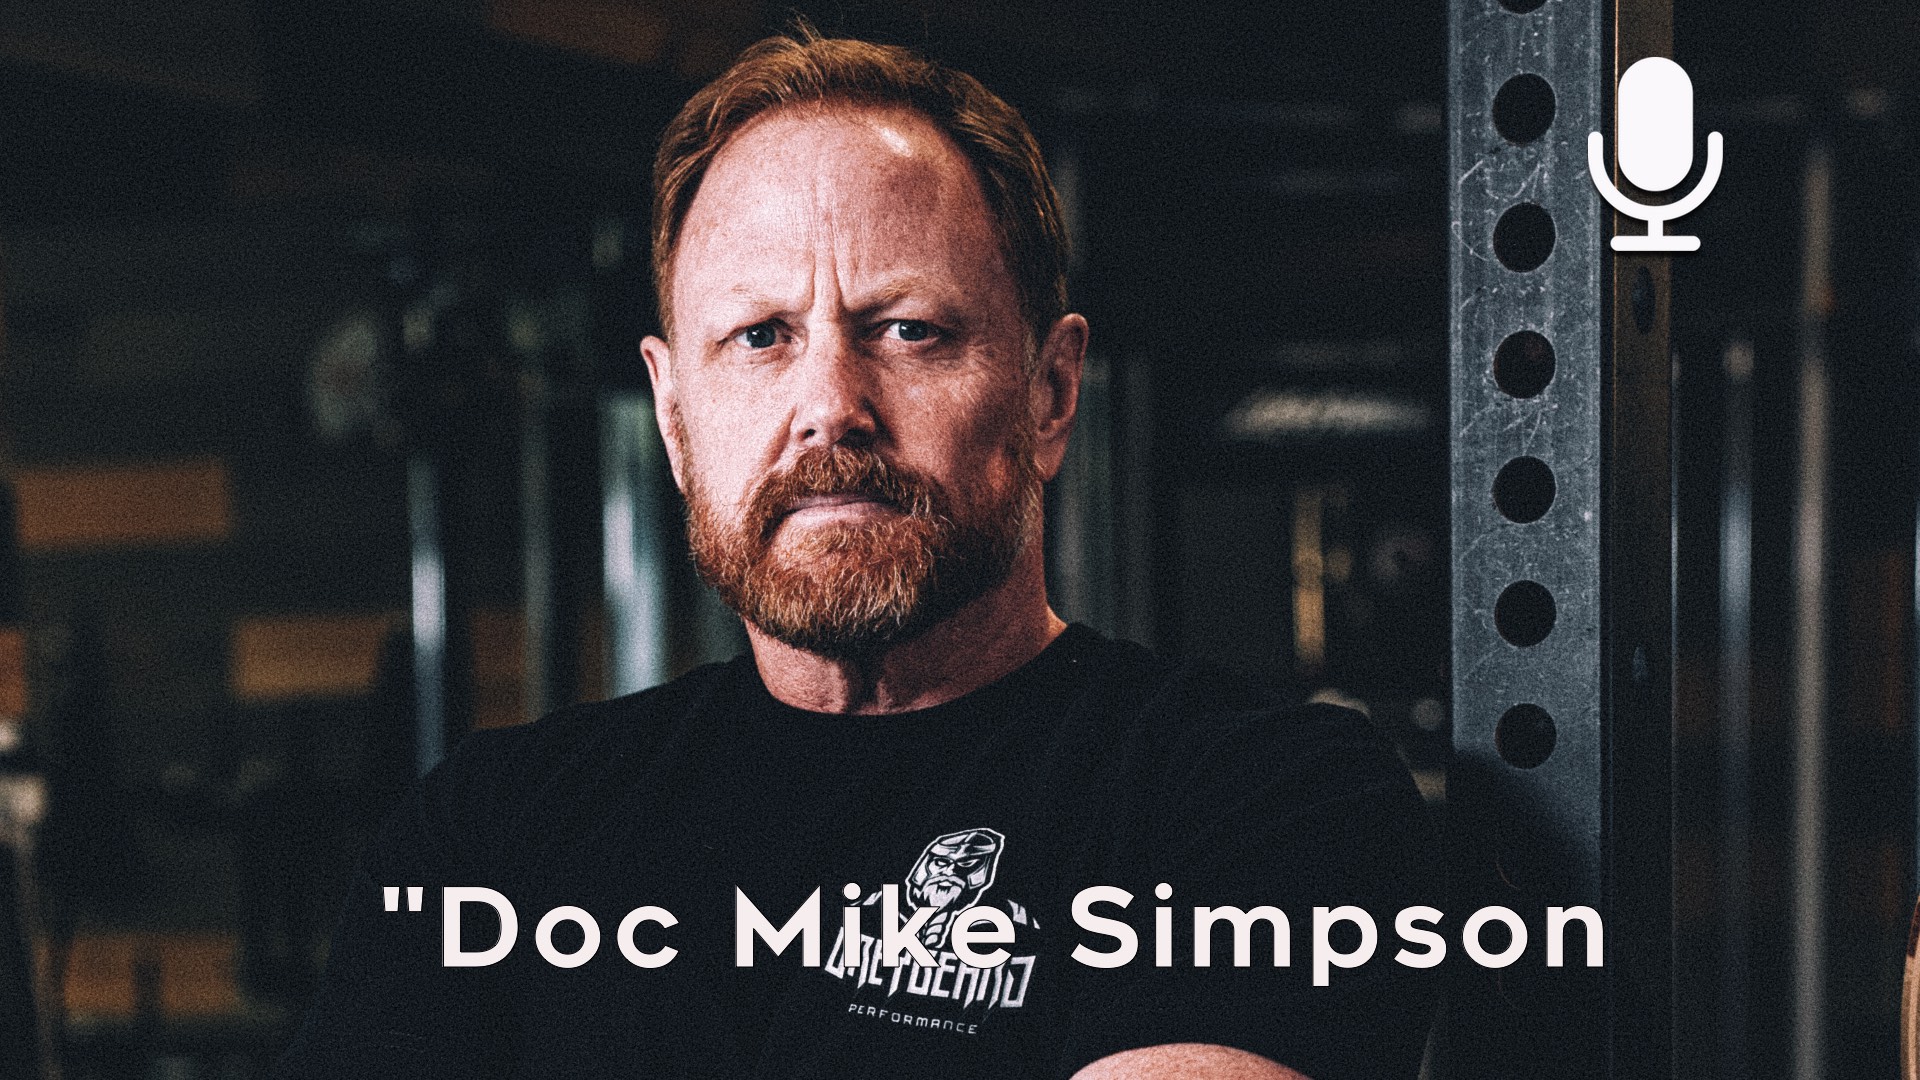 “Doc” Mike Simpson – Special Forces Vet and Author of “Honed”